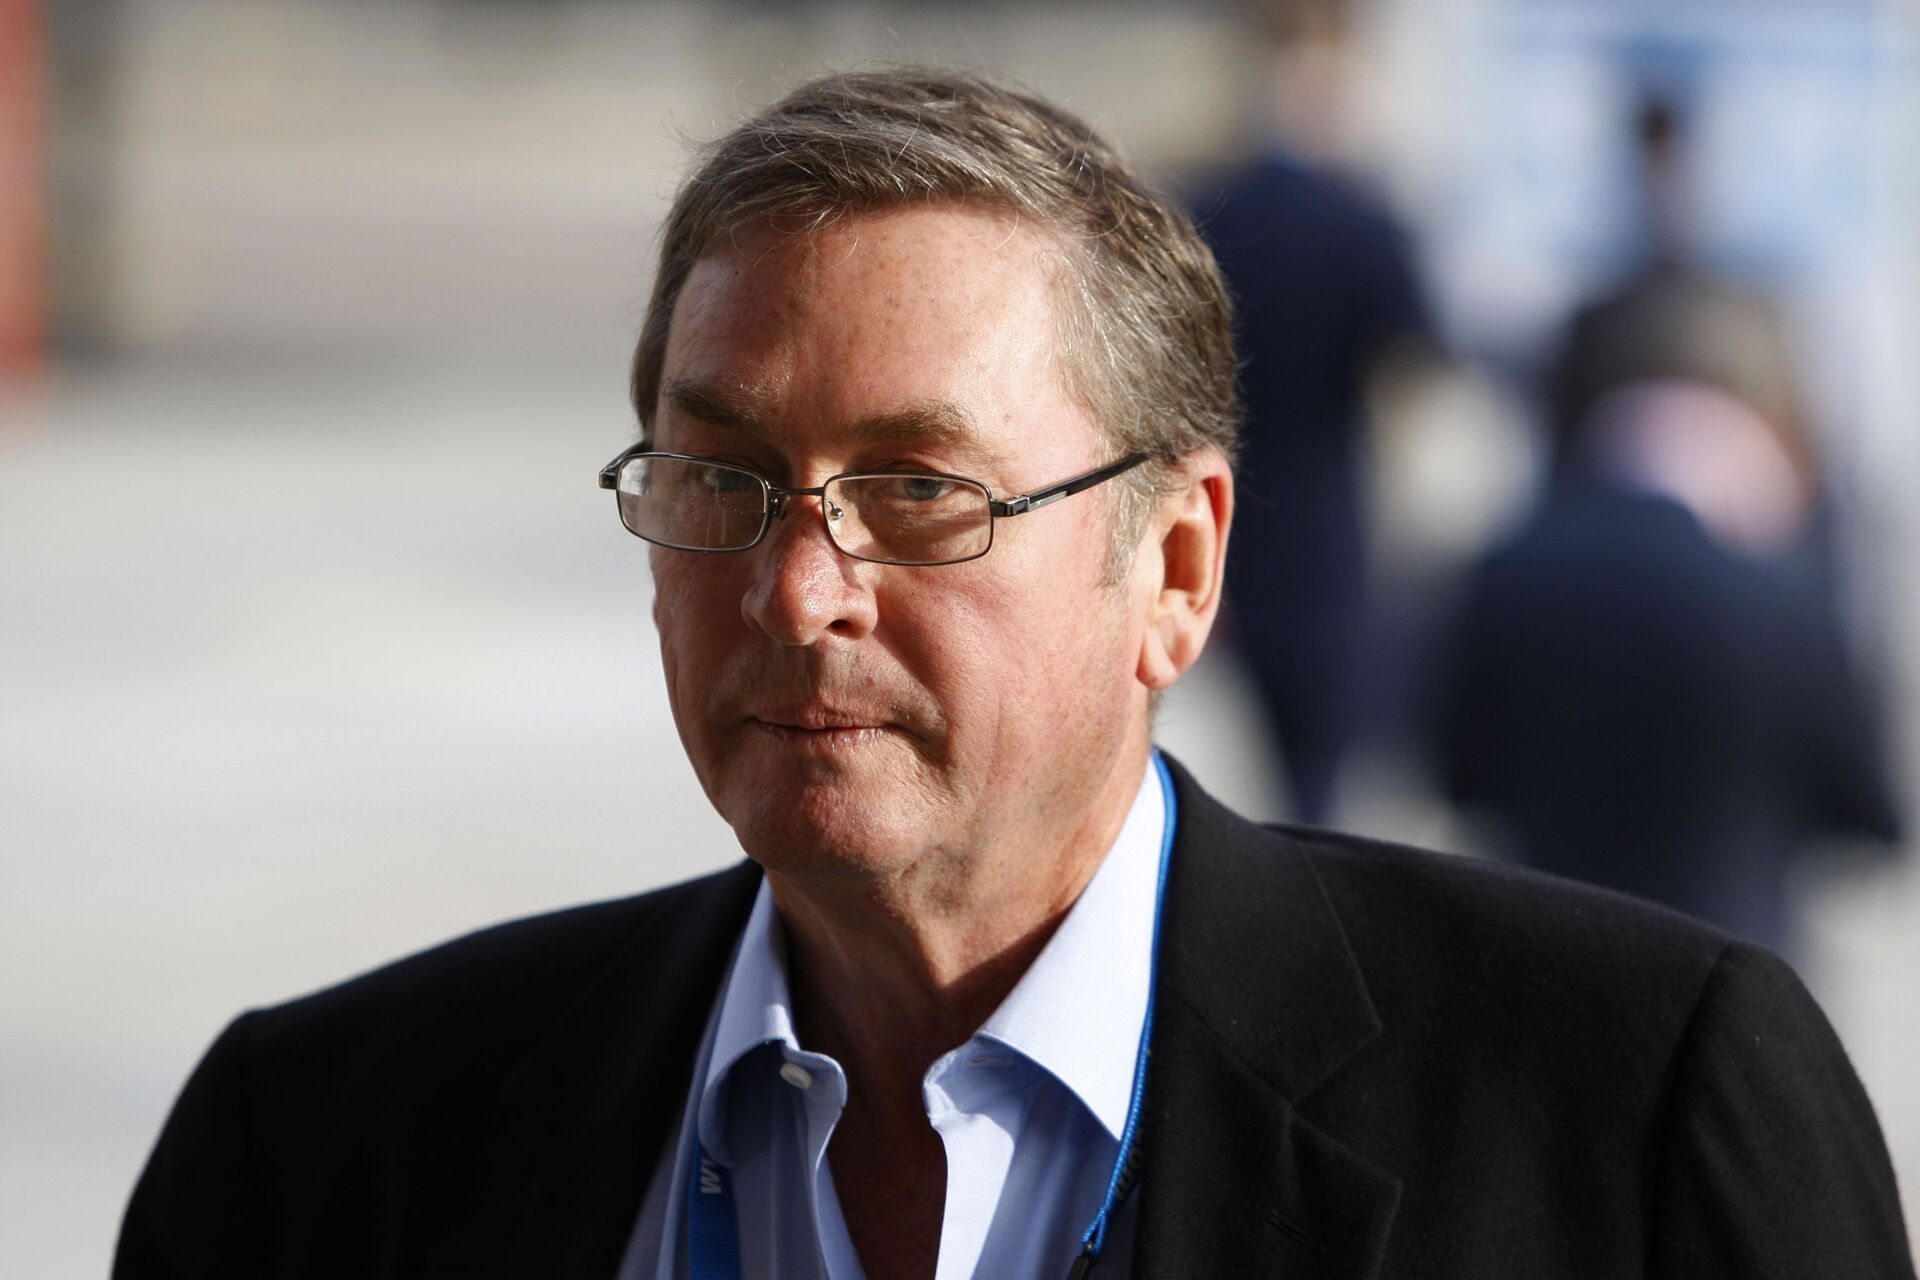 Daughter-in-Law of Lord Ashcroft Charged With Manslaughter in Belize Over Fatal Cop Shooting - Sputnik International, 1920, 01.06.2021